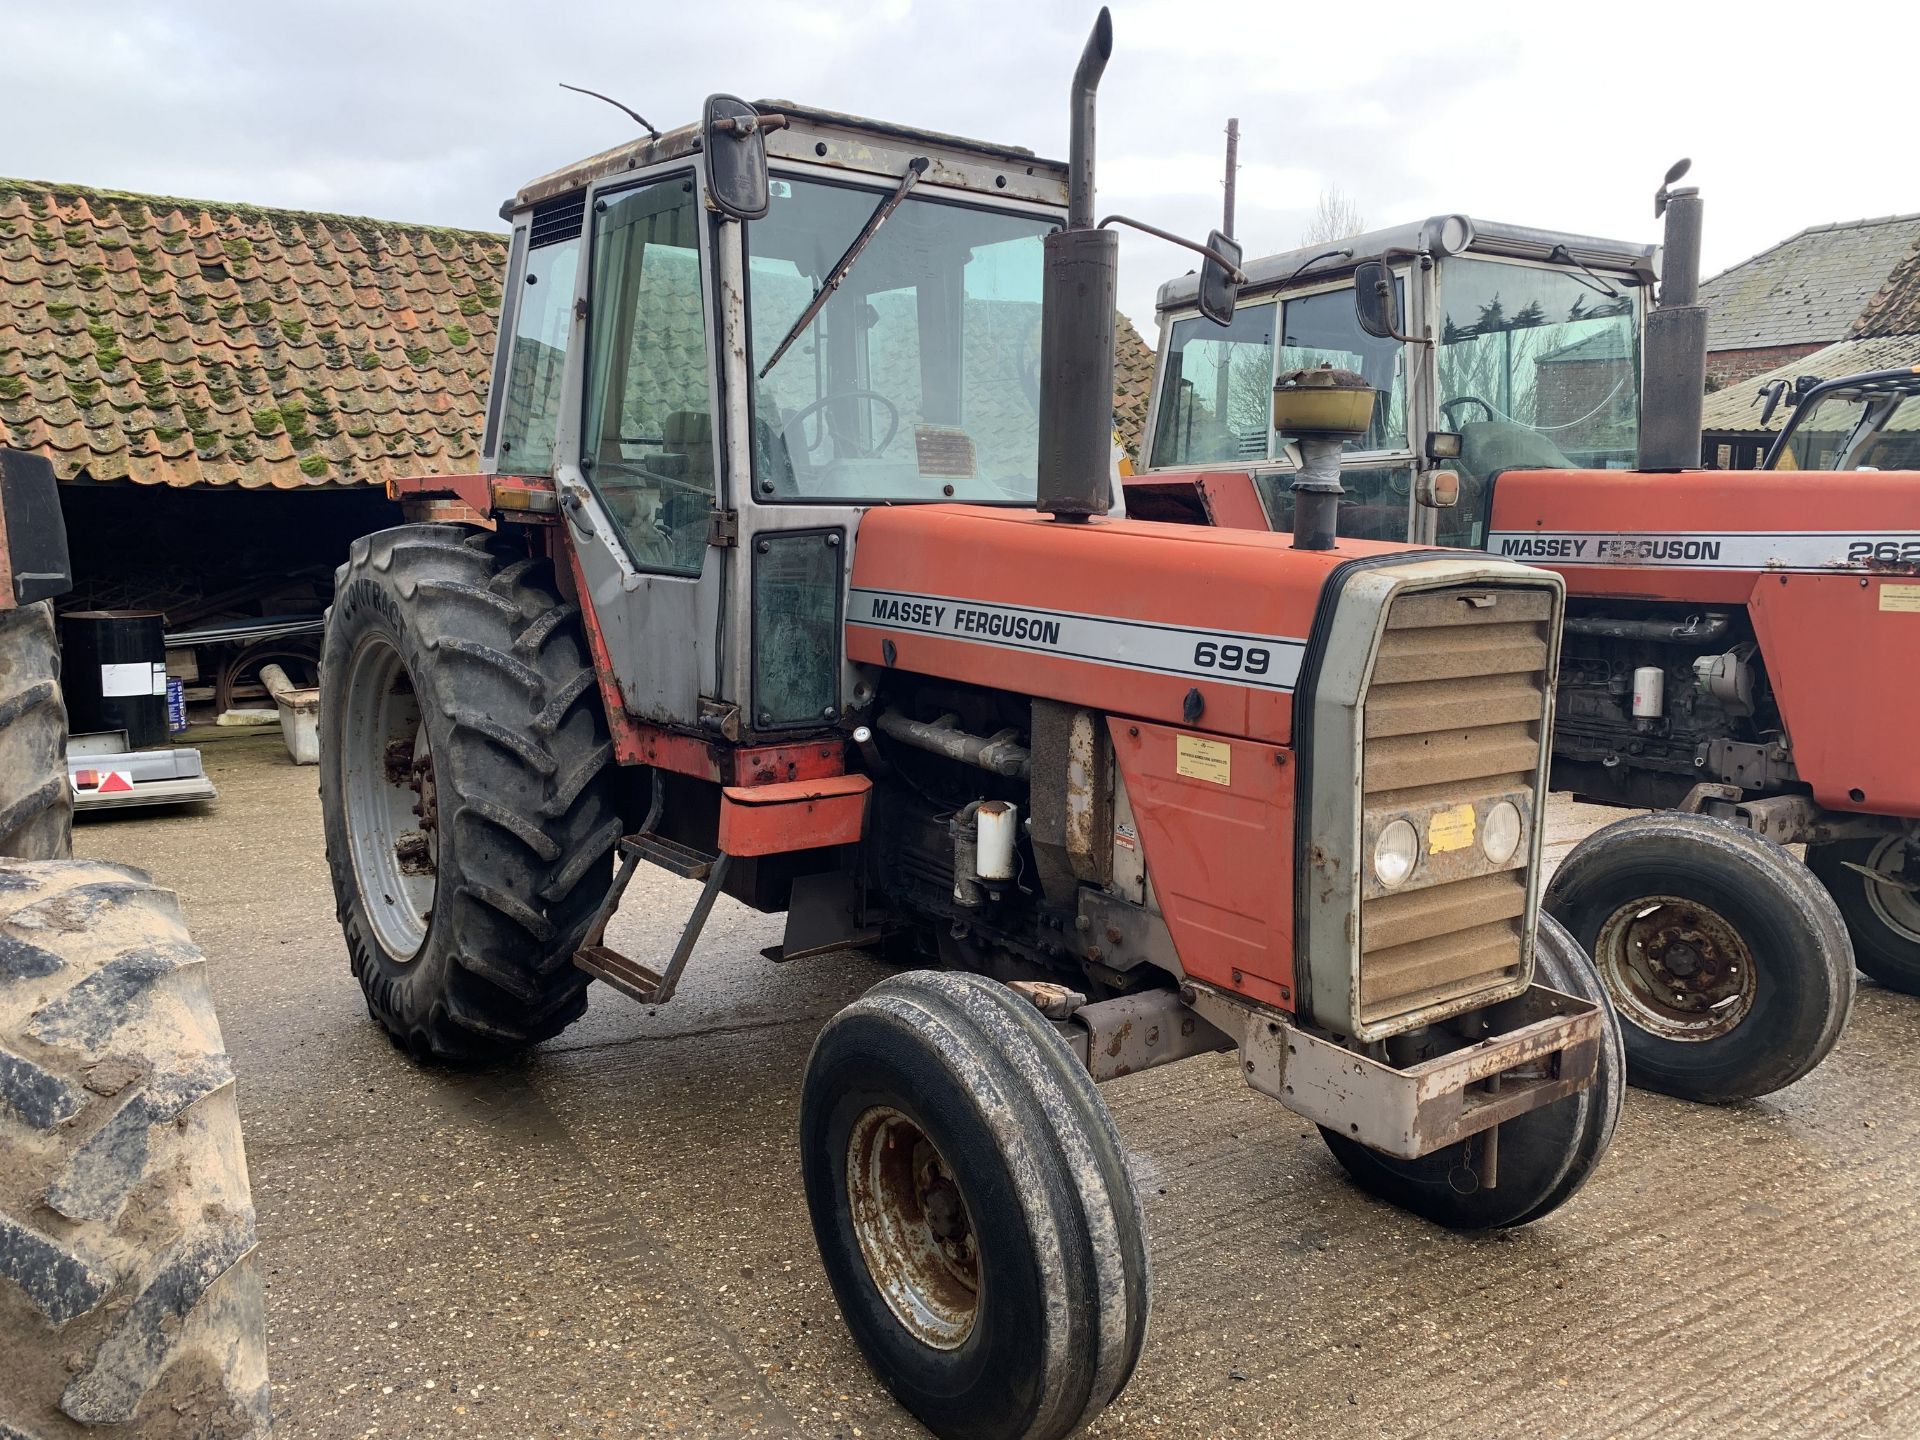 1985 Massey Ferguson 699 2wd tractor, C216 CAT, 7992 hours, runner, 420/85R38 rear tyres with - Image 7 of 7